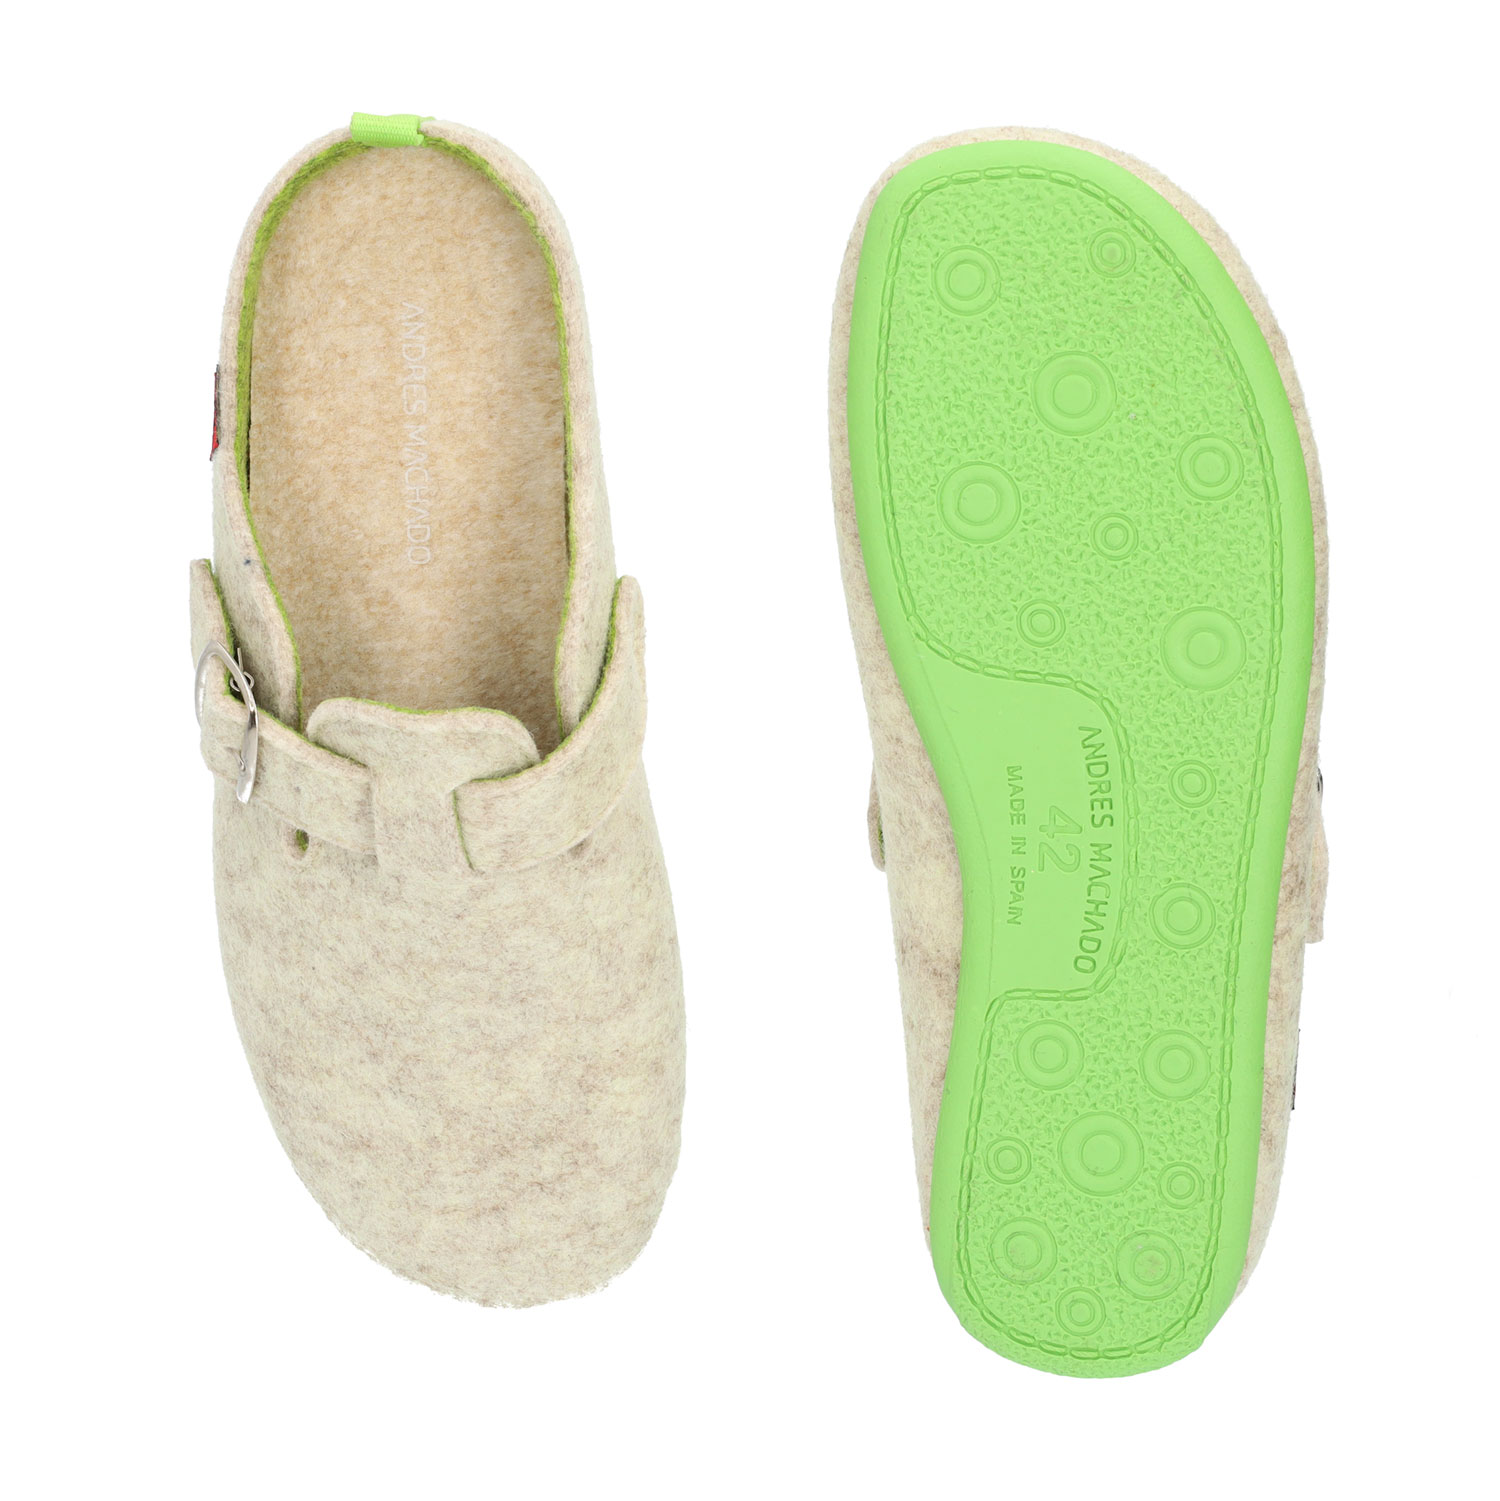 Unisex home slippers in white felt and buckle detail 